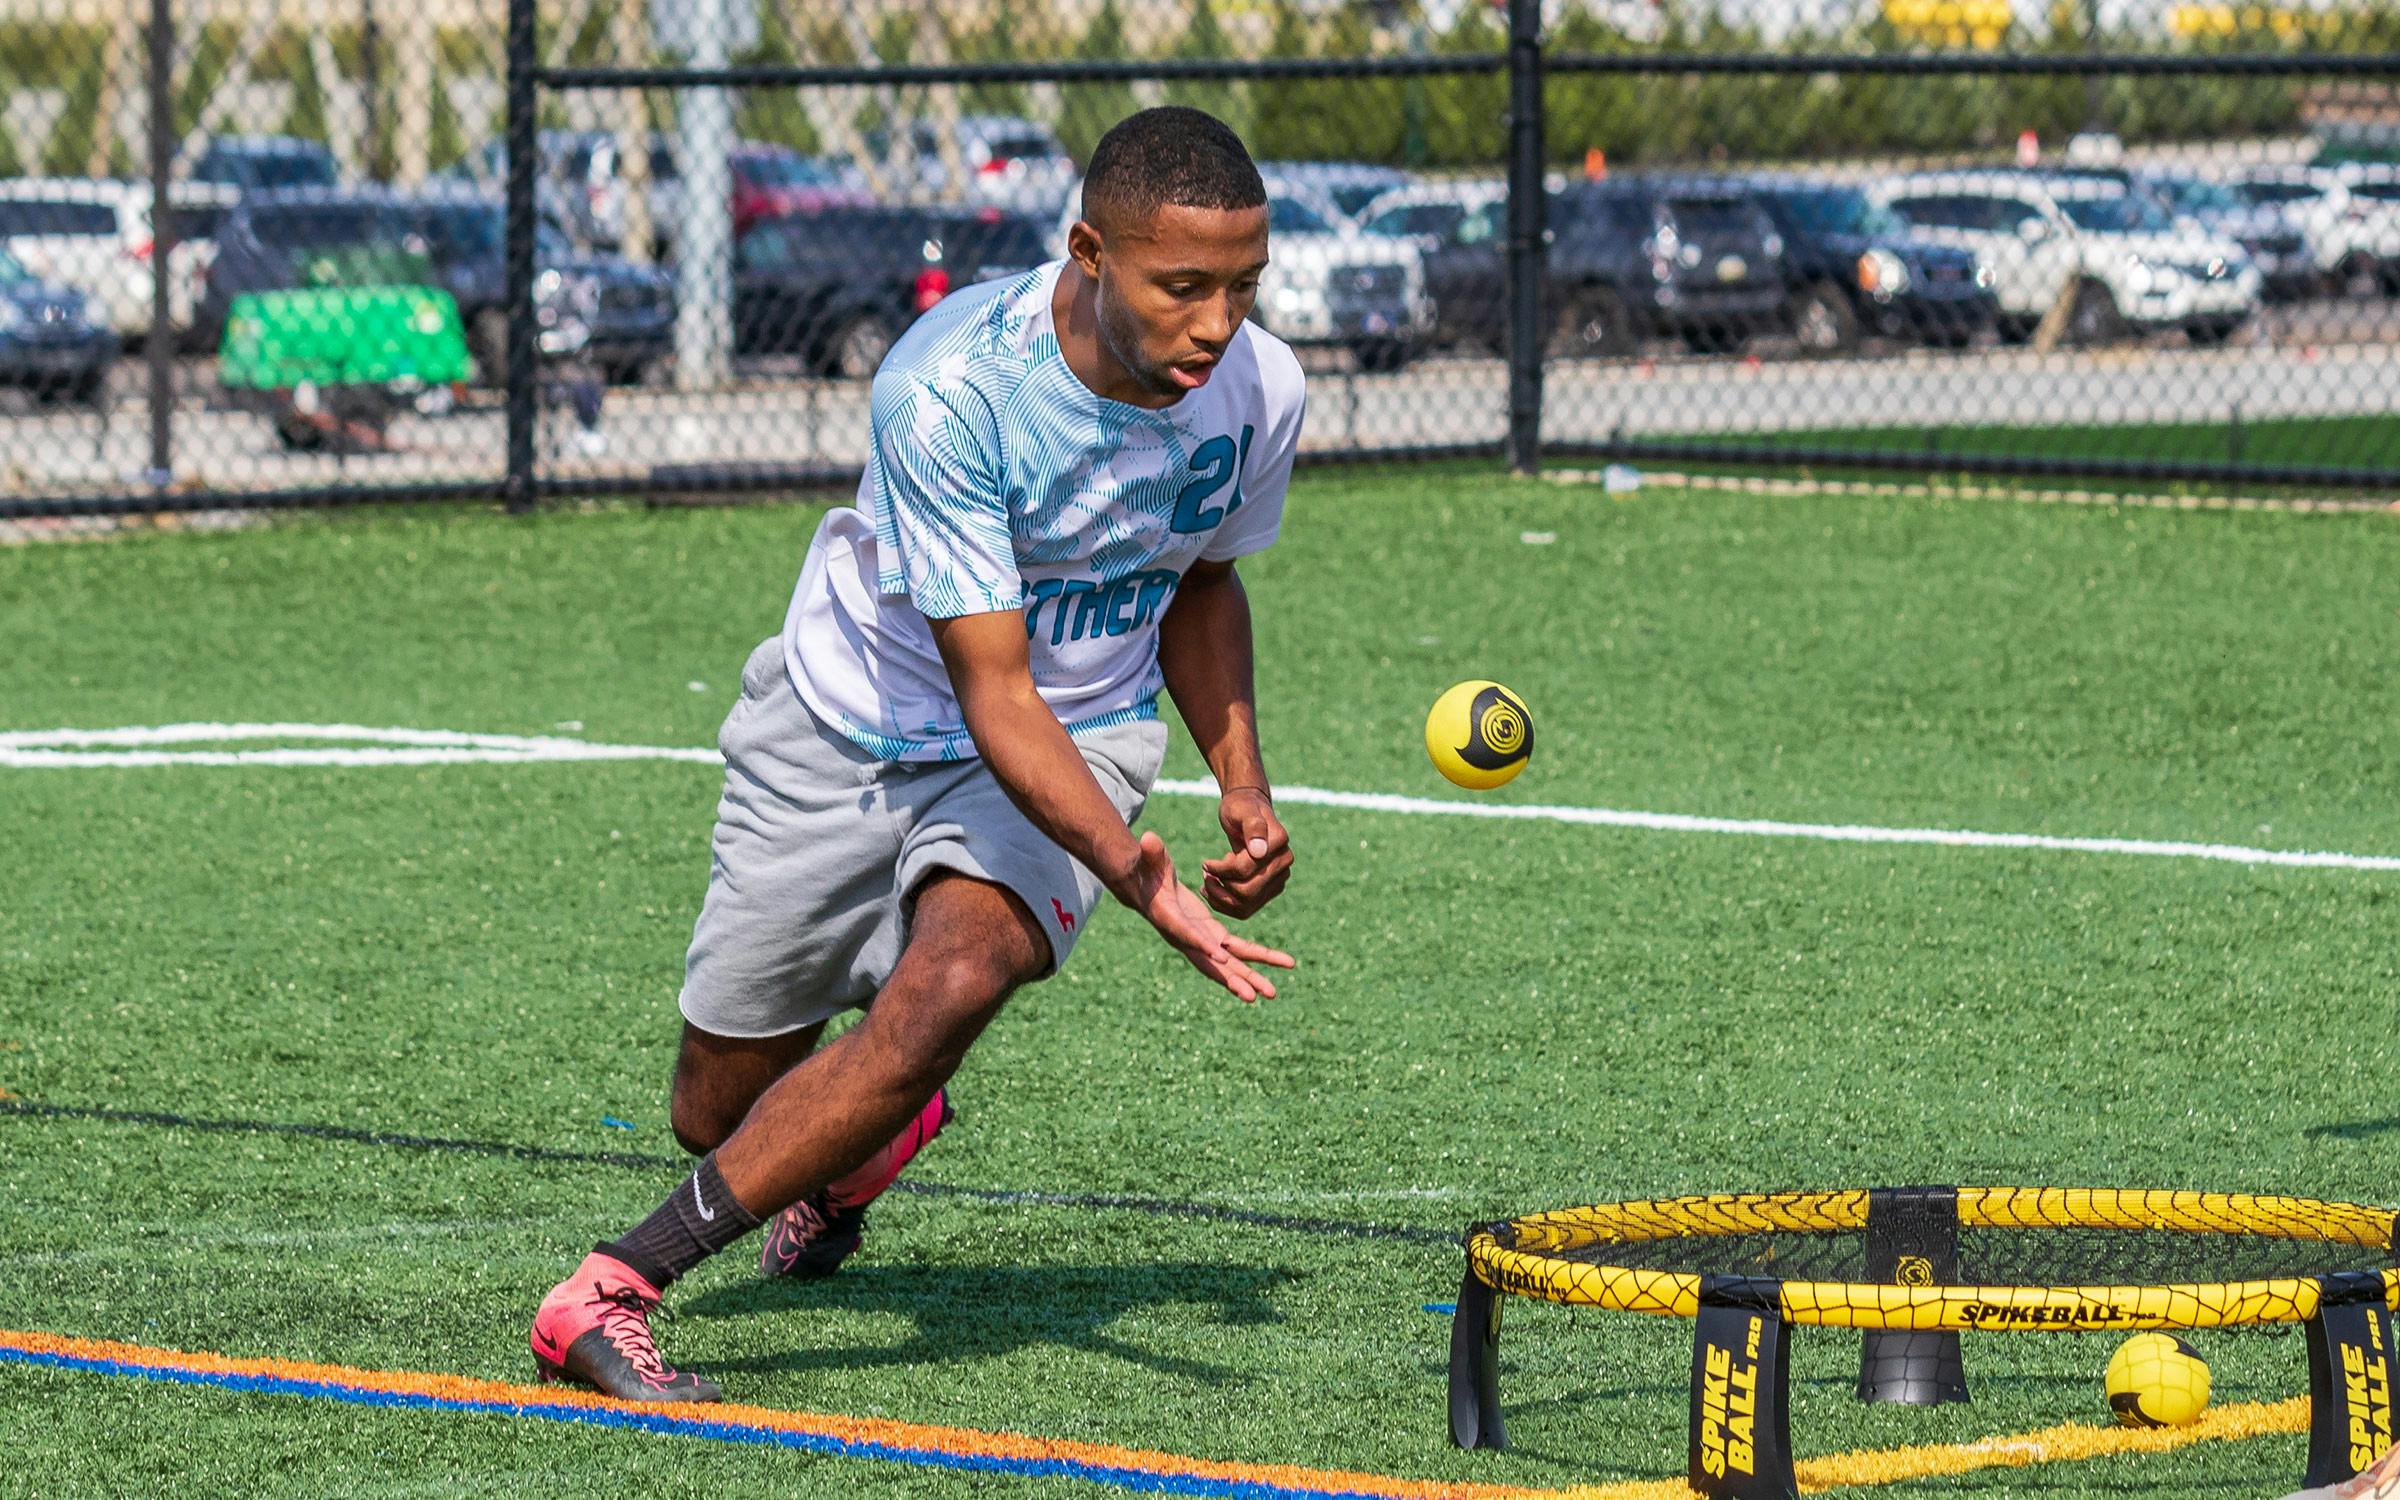 Texas Monthly Recommends: A Game of Spikeball – Texas Monthly